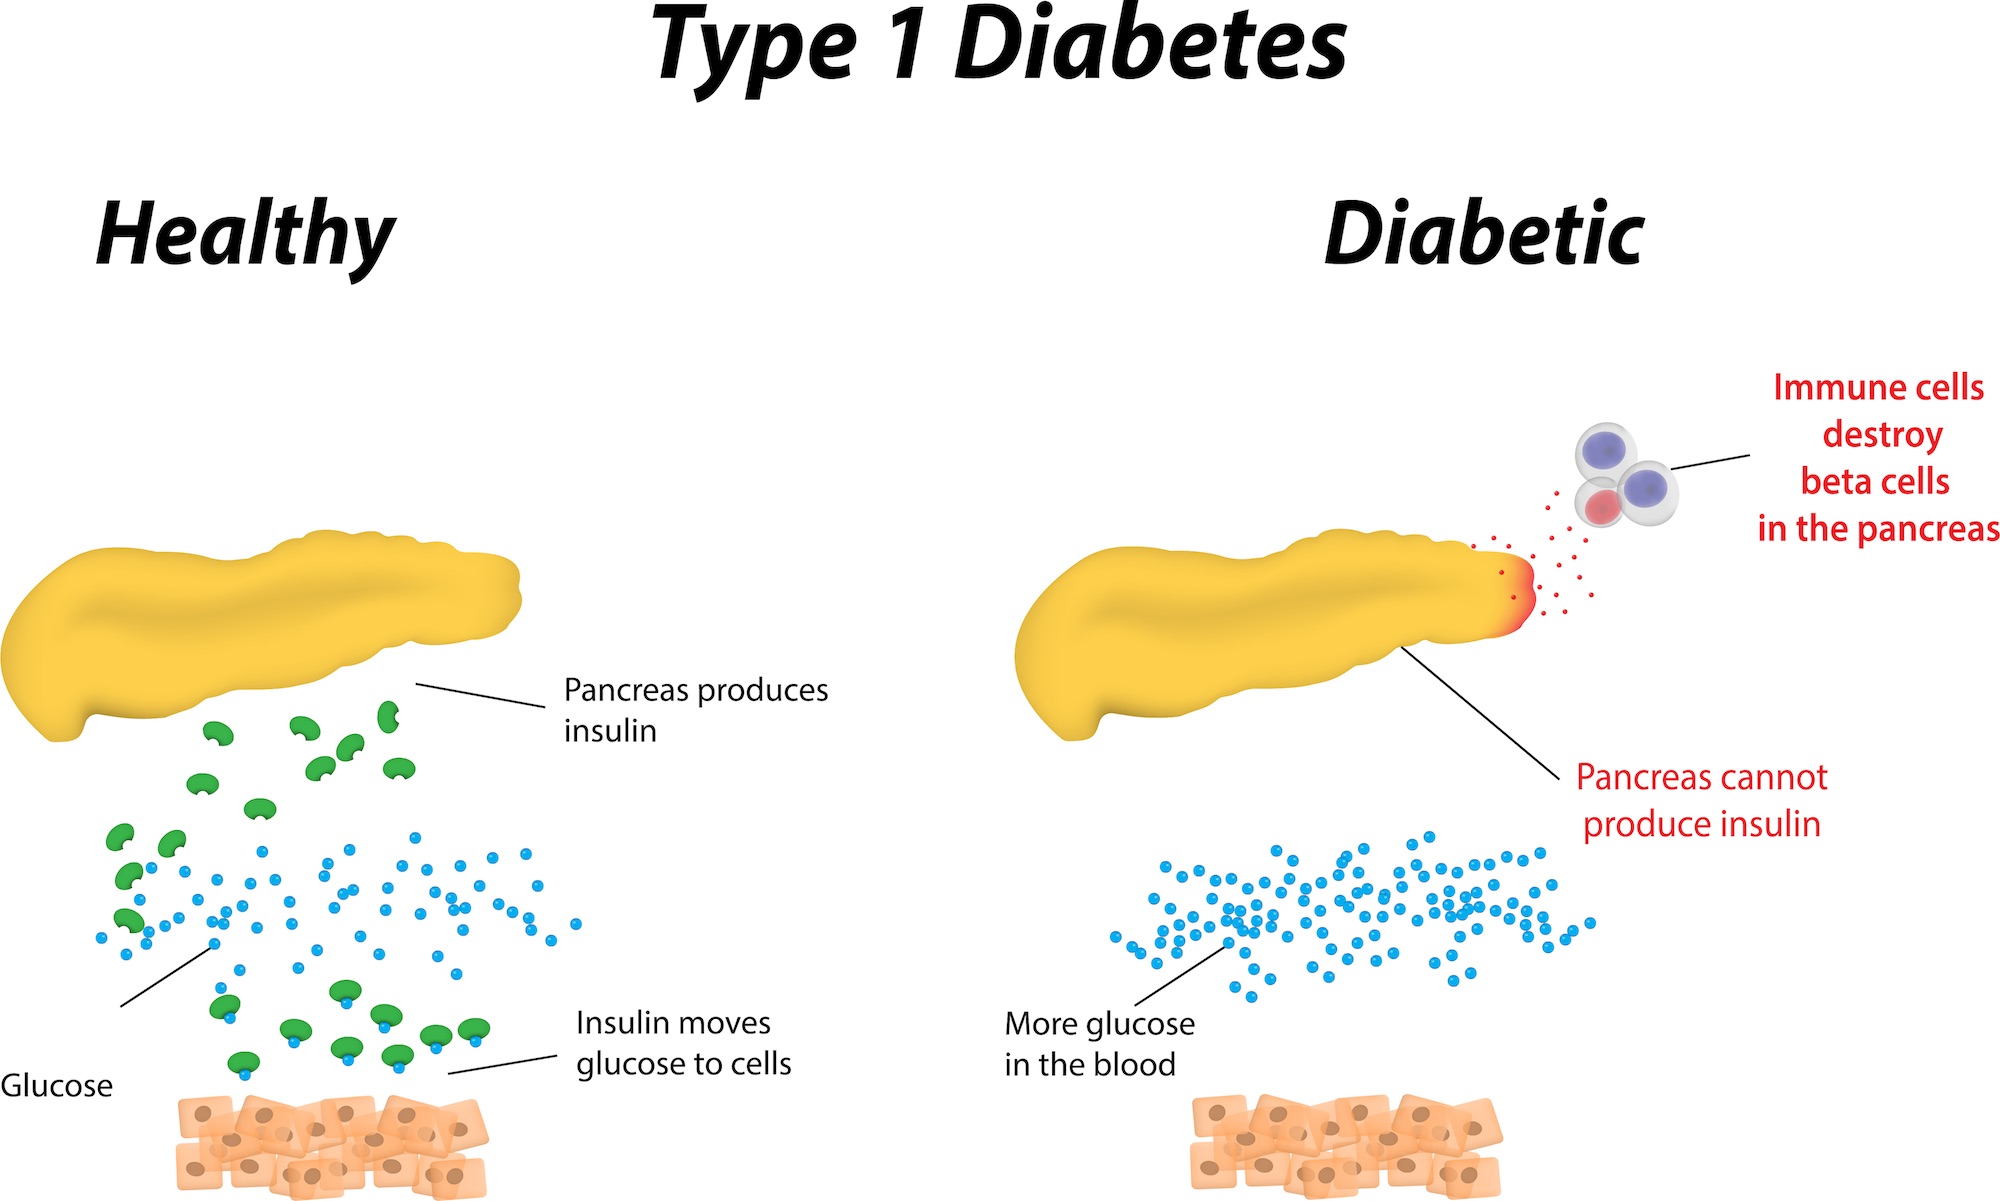 People who have type 1 diabetes mellitus do not produce insulin